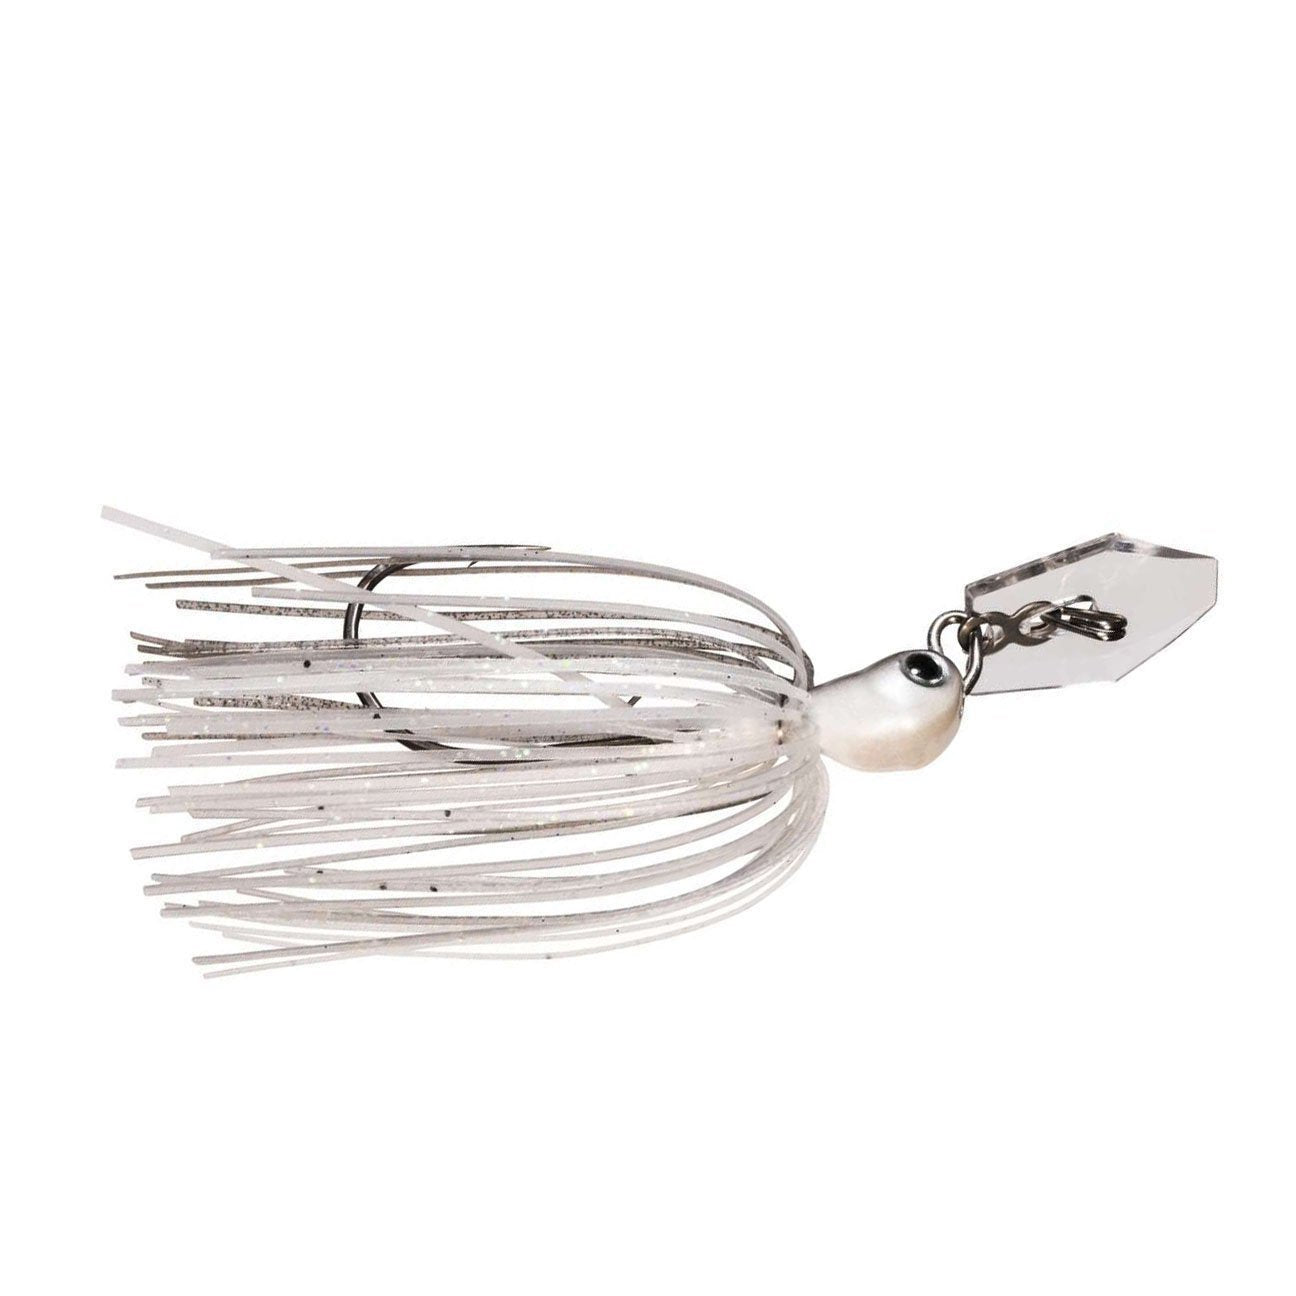 Stainless Steel Chatterbait Blade, Stainless Steel Fishing Jig Lure